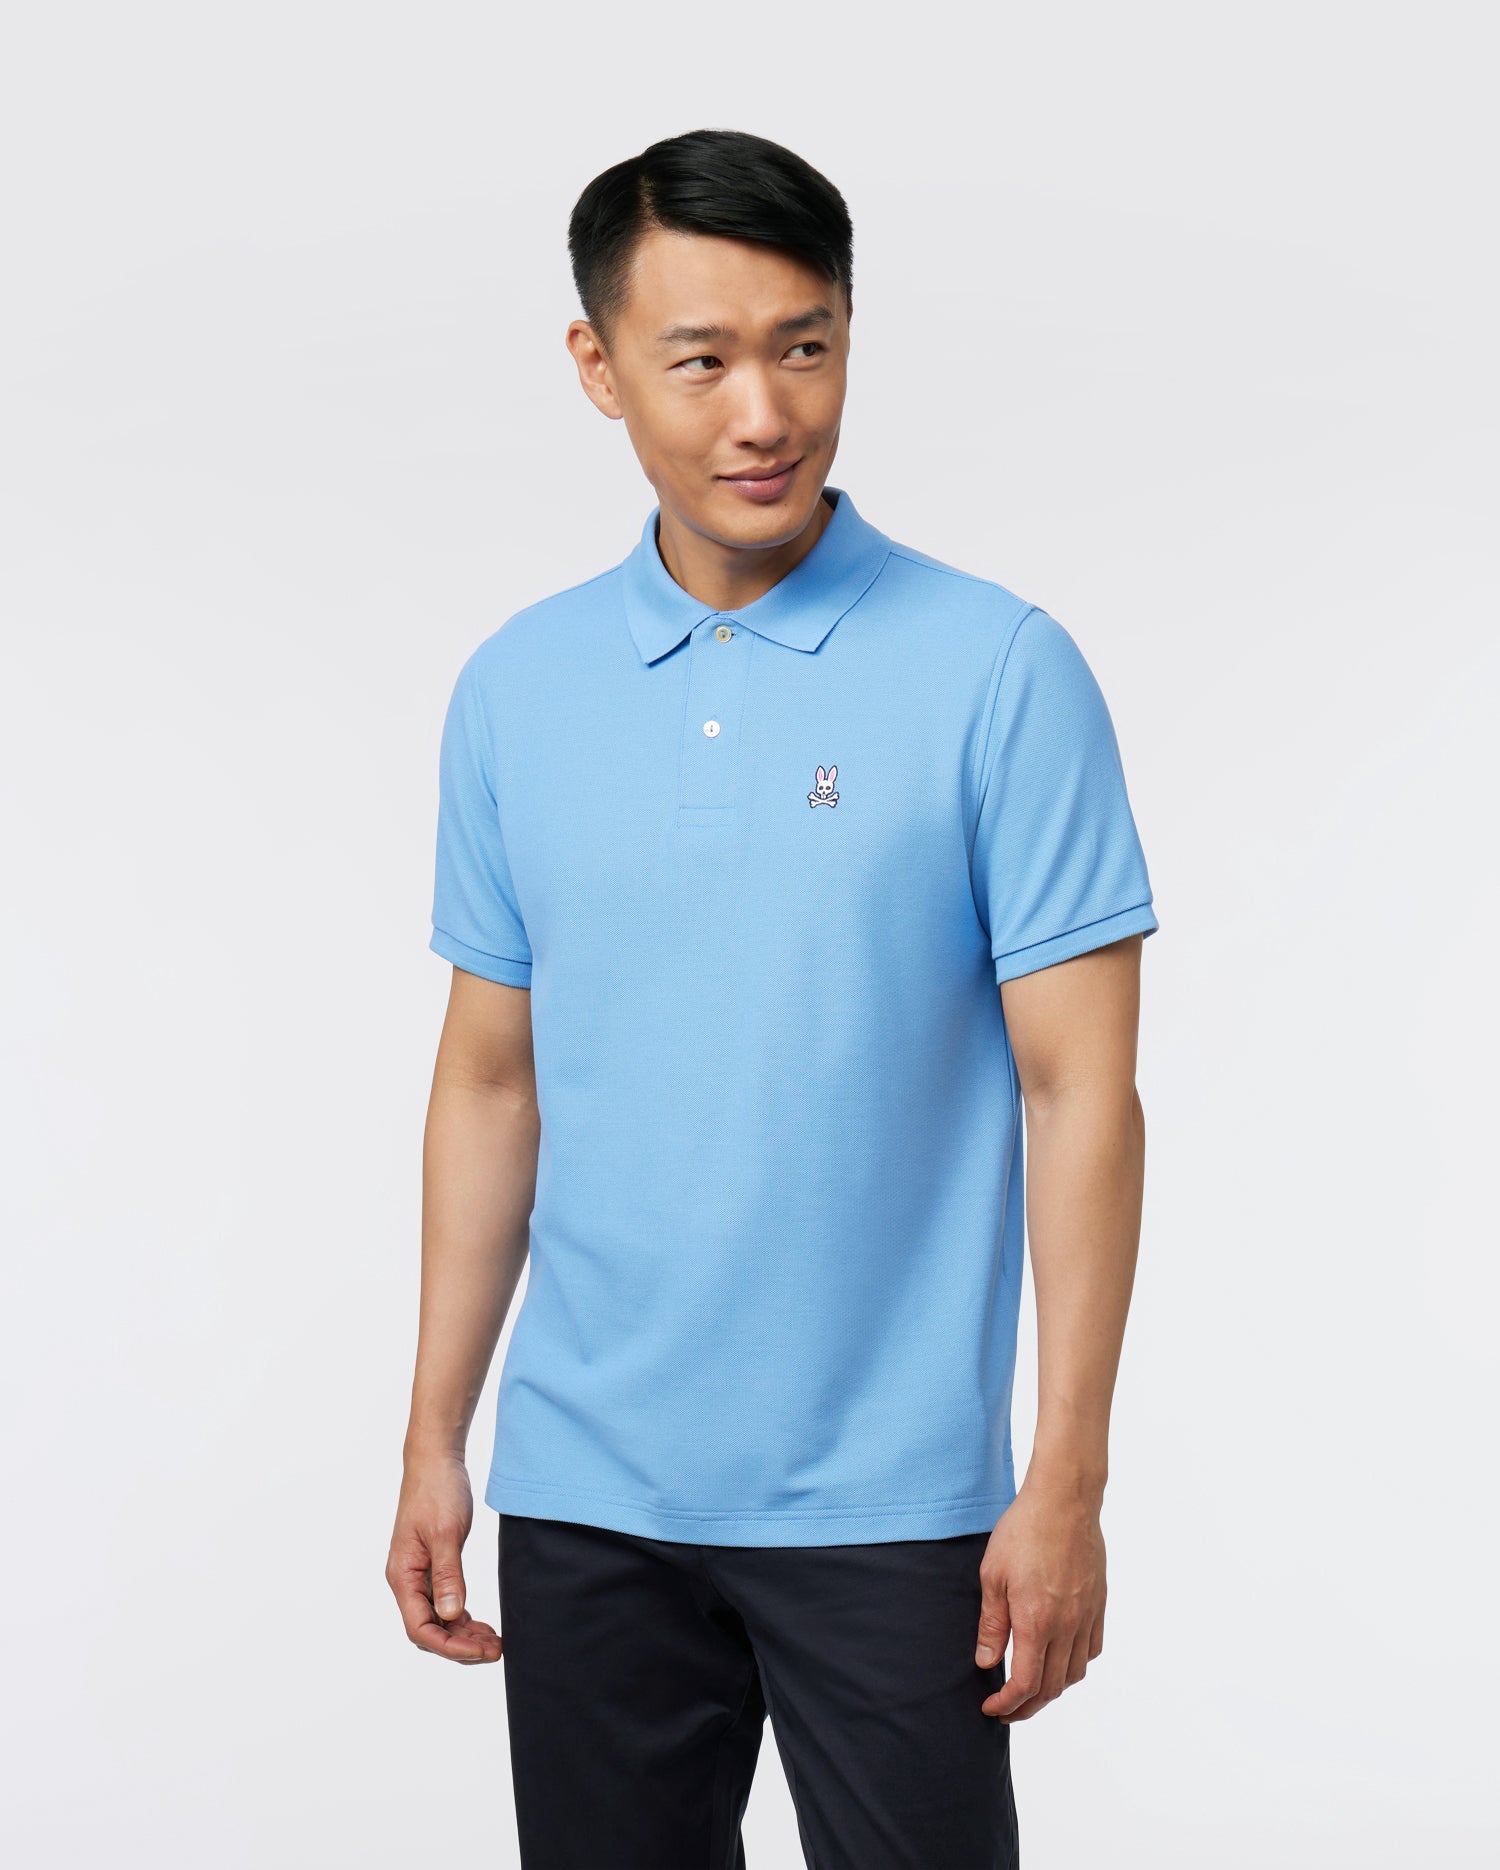 lomme befolkning forlade MENS LIGHT BLUE CLASSIC PIQUE POLO | PSYCHO BUNNY